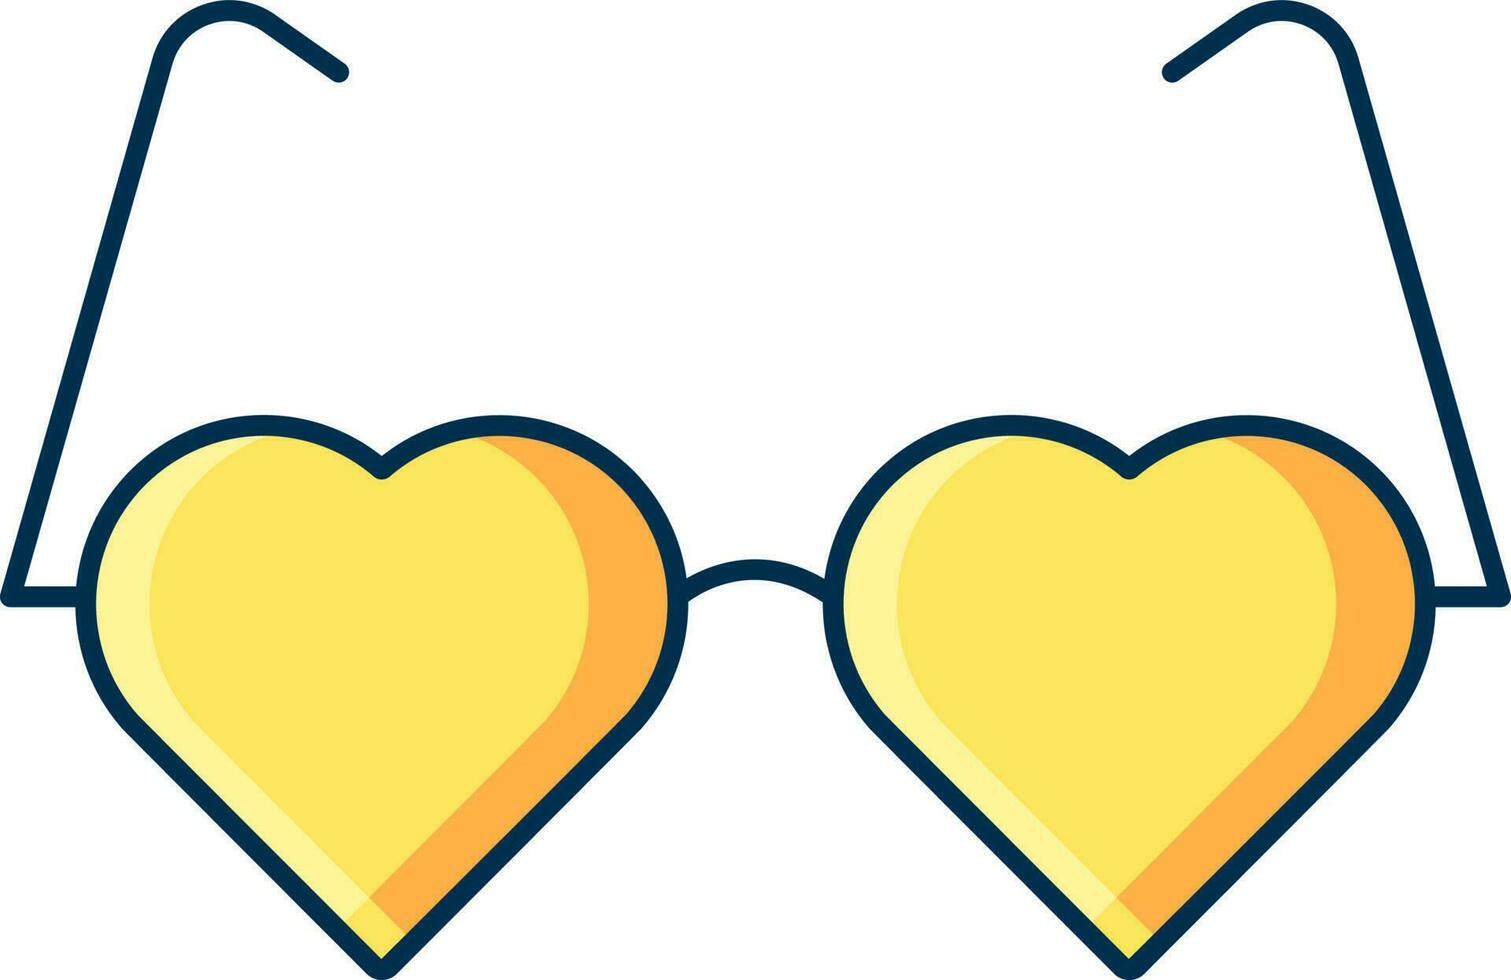 Illustration of Heart Shaped Goggles Icon in Yellow Color. vector